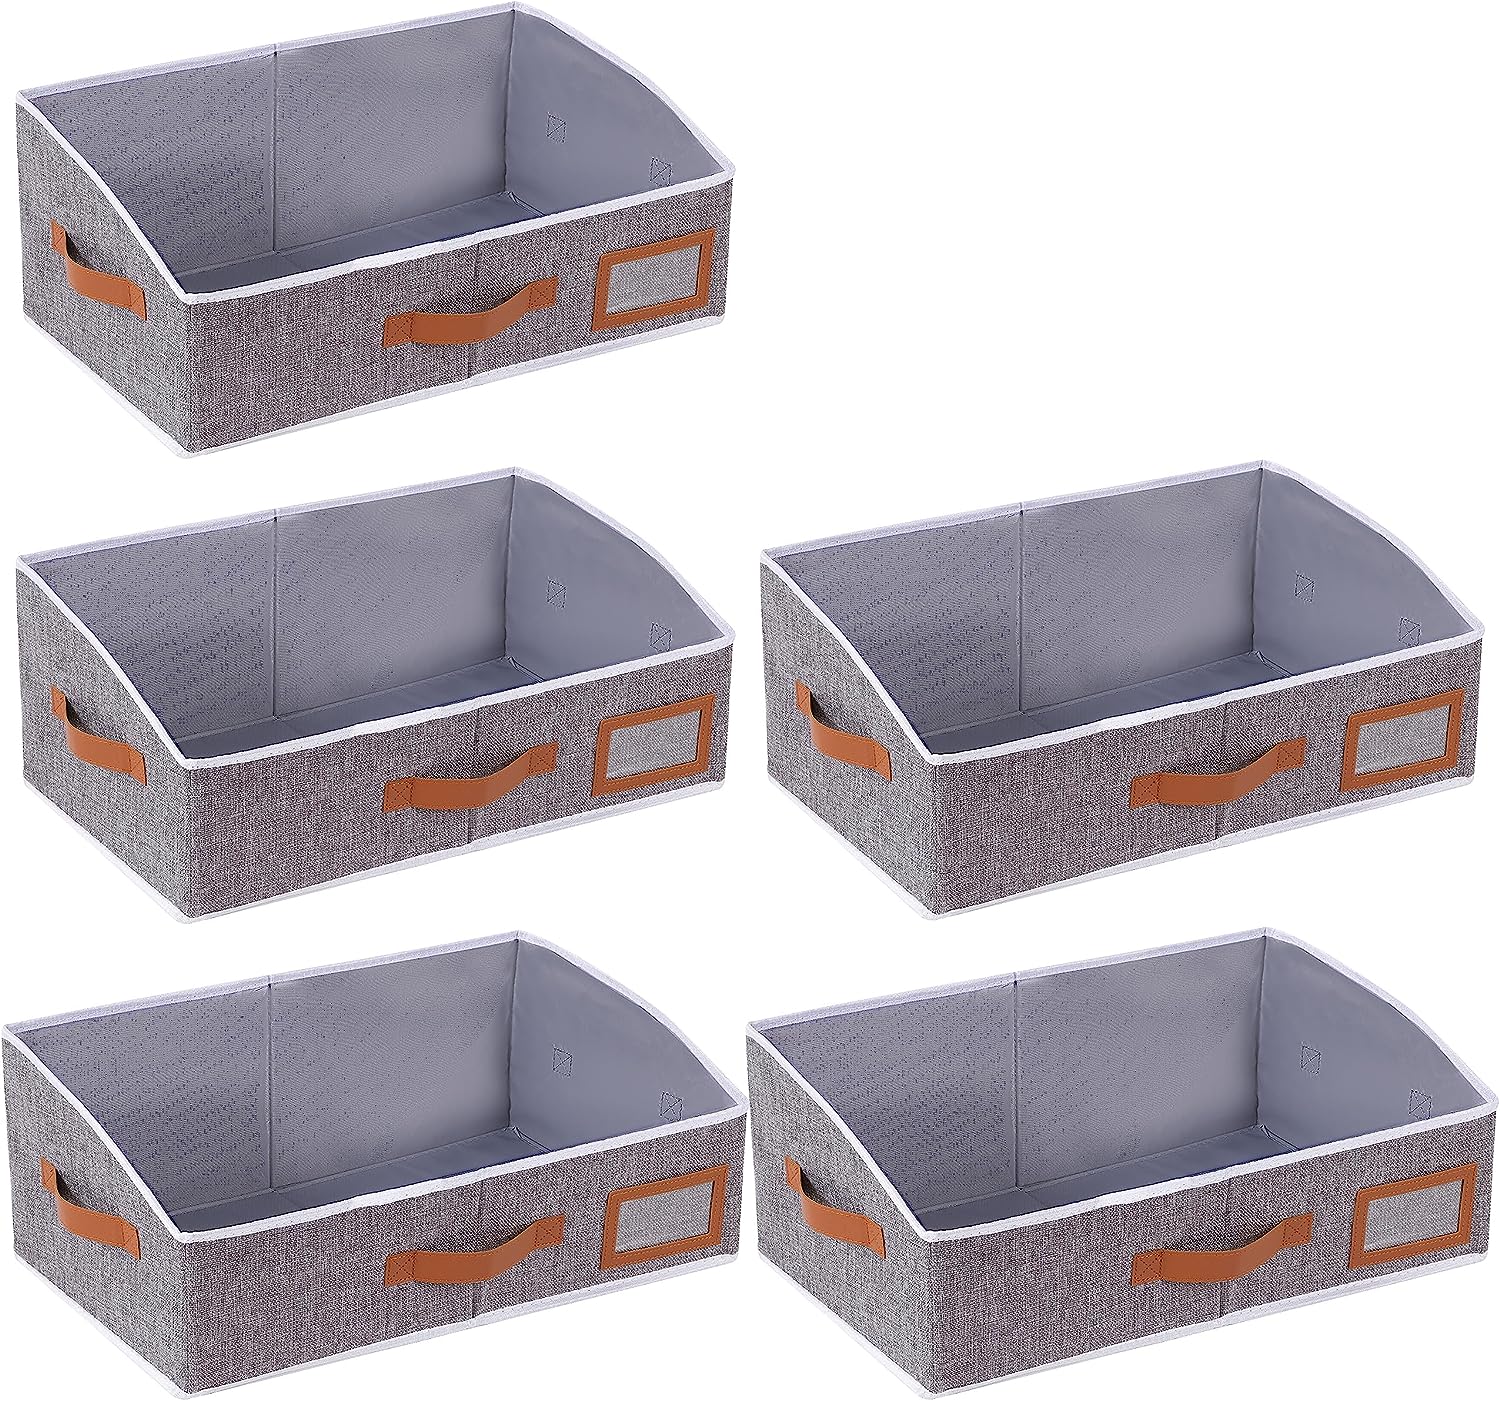 Blushbees® Foldable Trapezoidal Storage Bins - 3-Pack, Beige